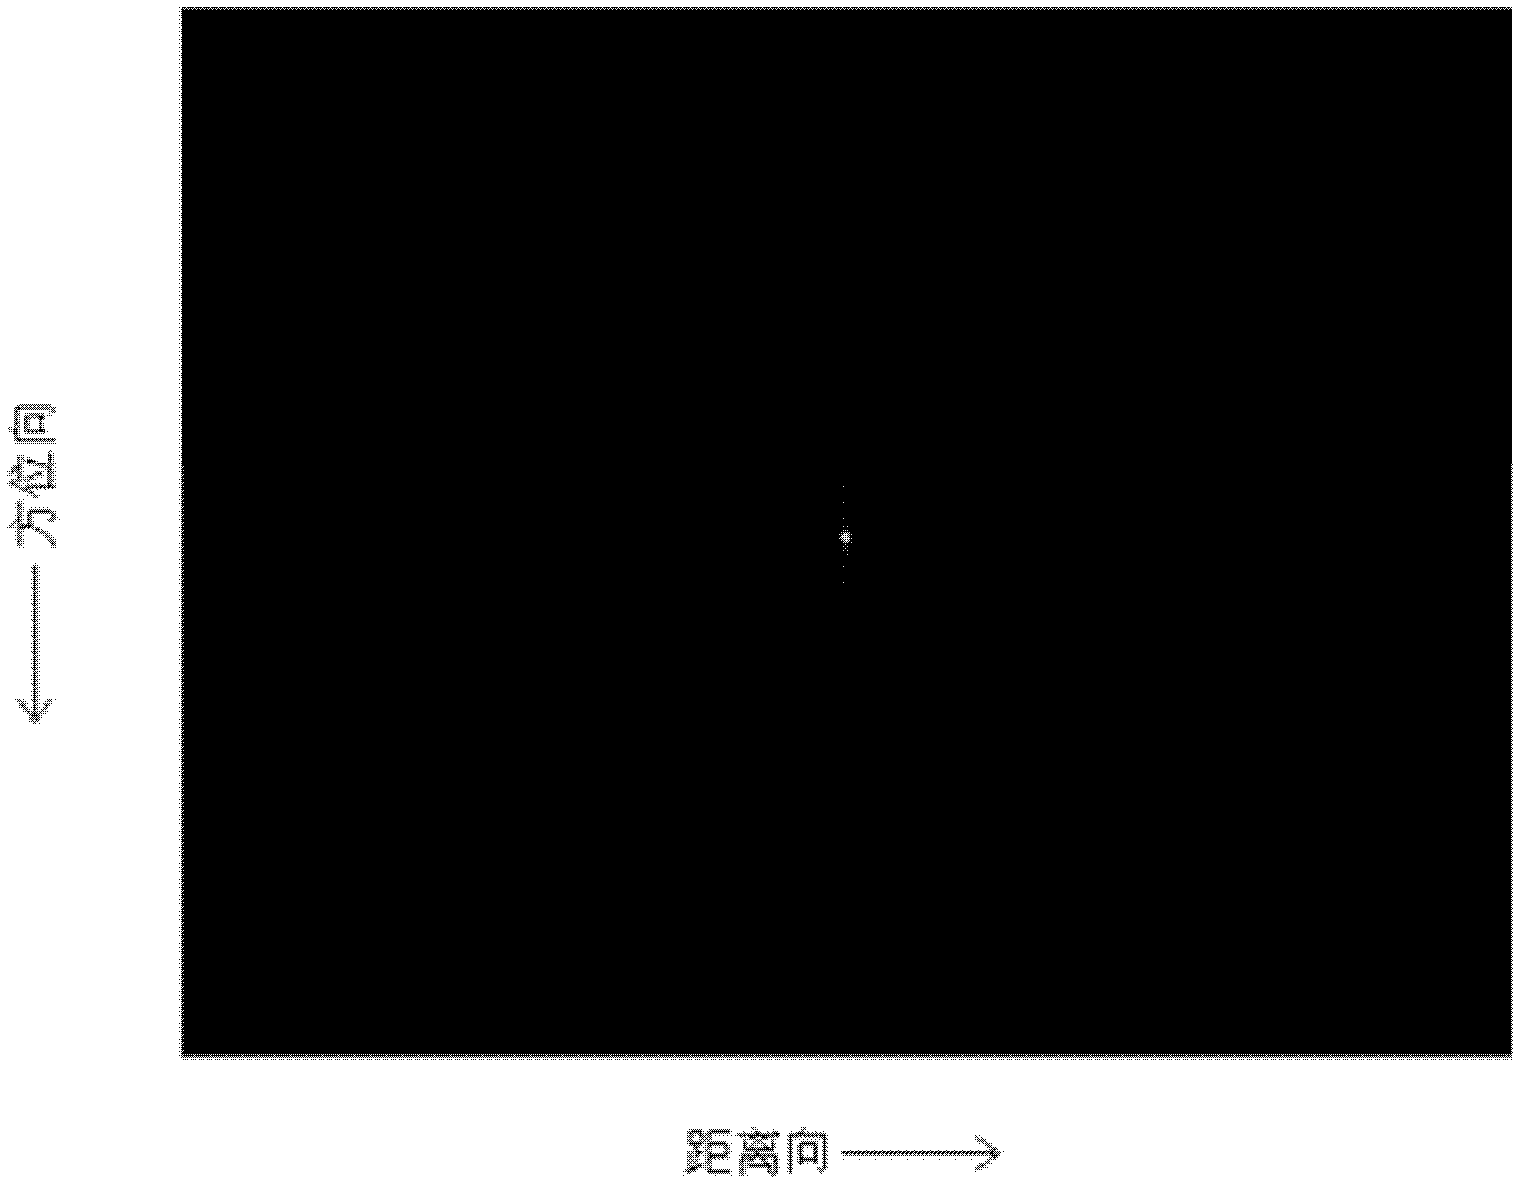 Ultralow sidelobe synthetic aperture radar imaging method based on complete complementary sequence